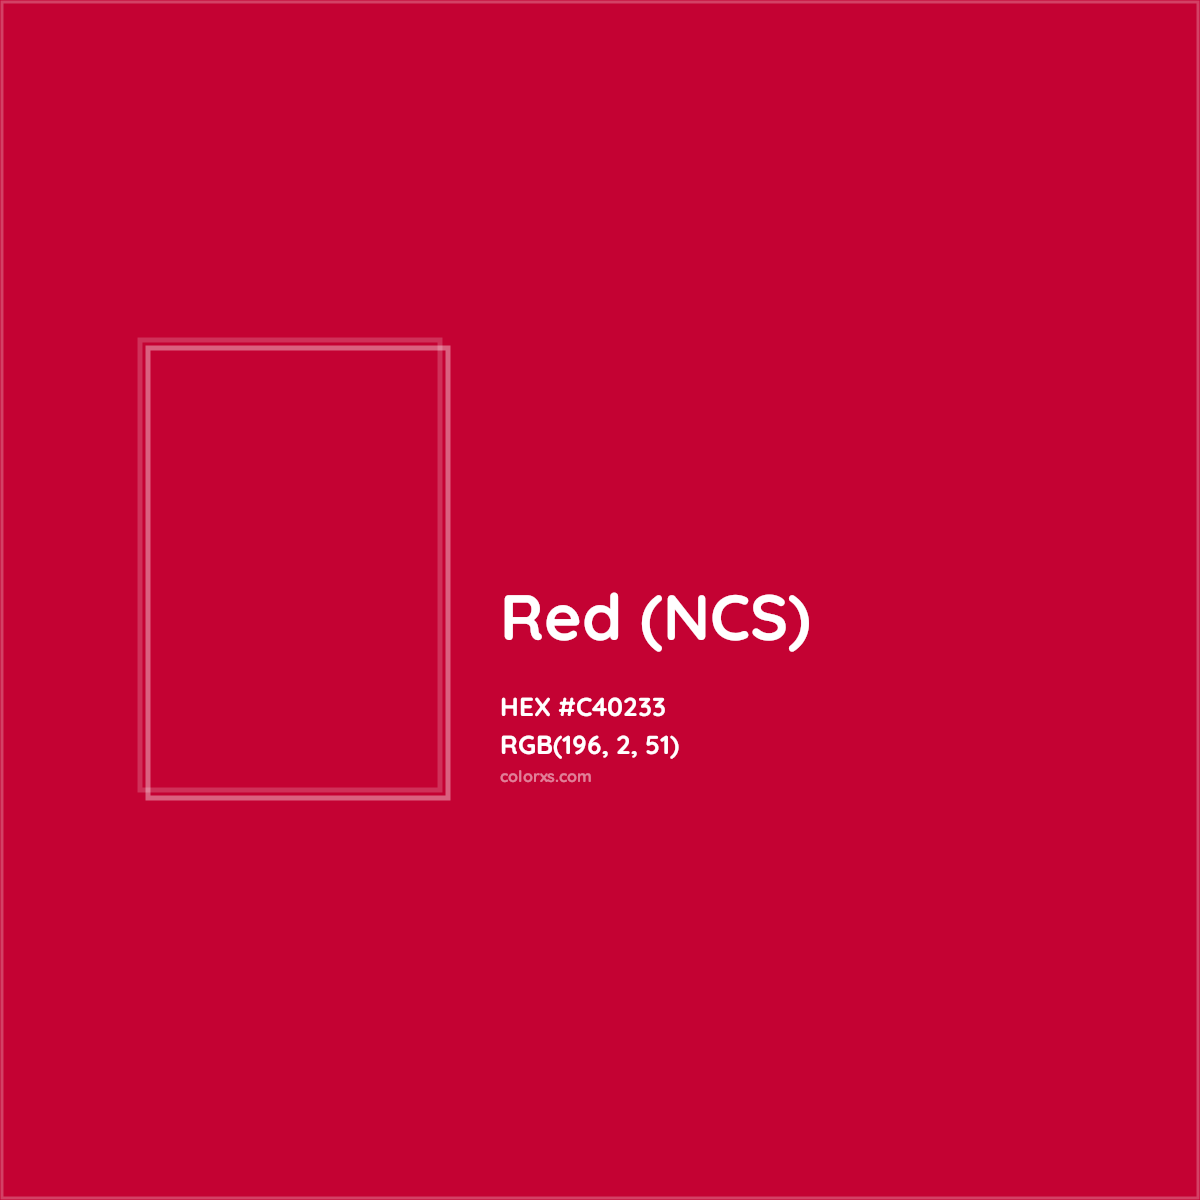 HEX #C40233 Red (NCS) Color - Color Code